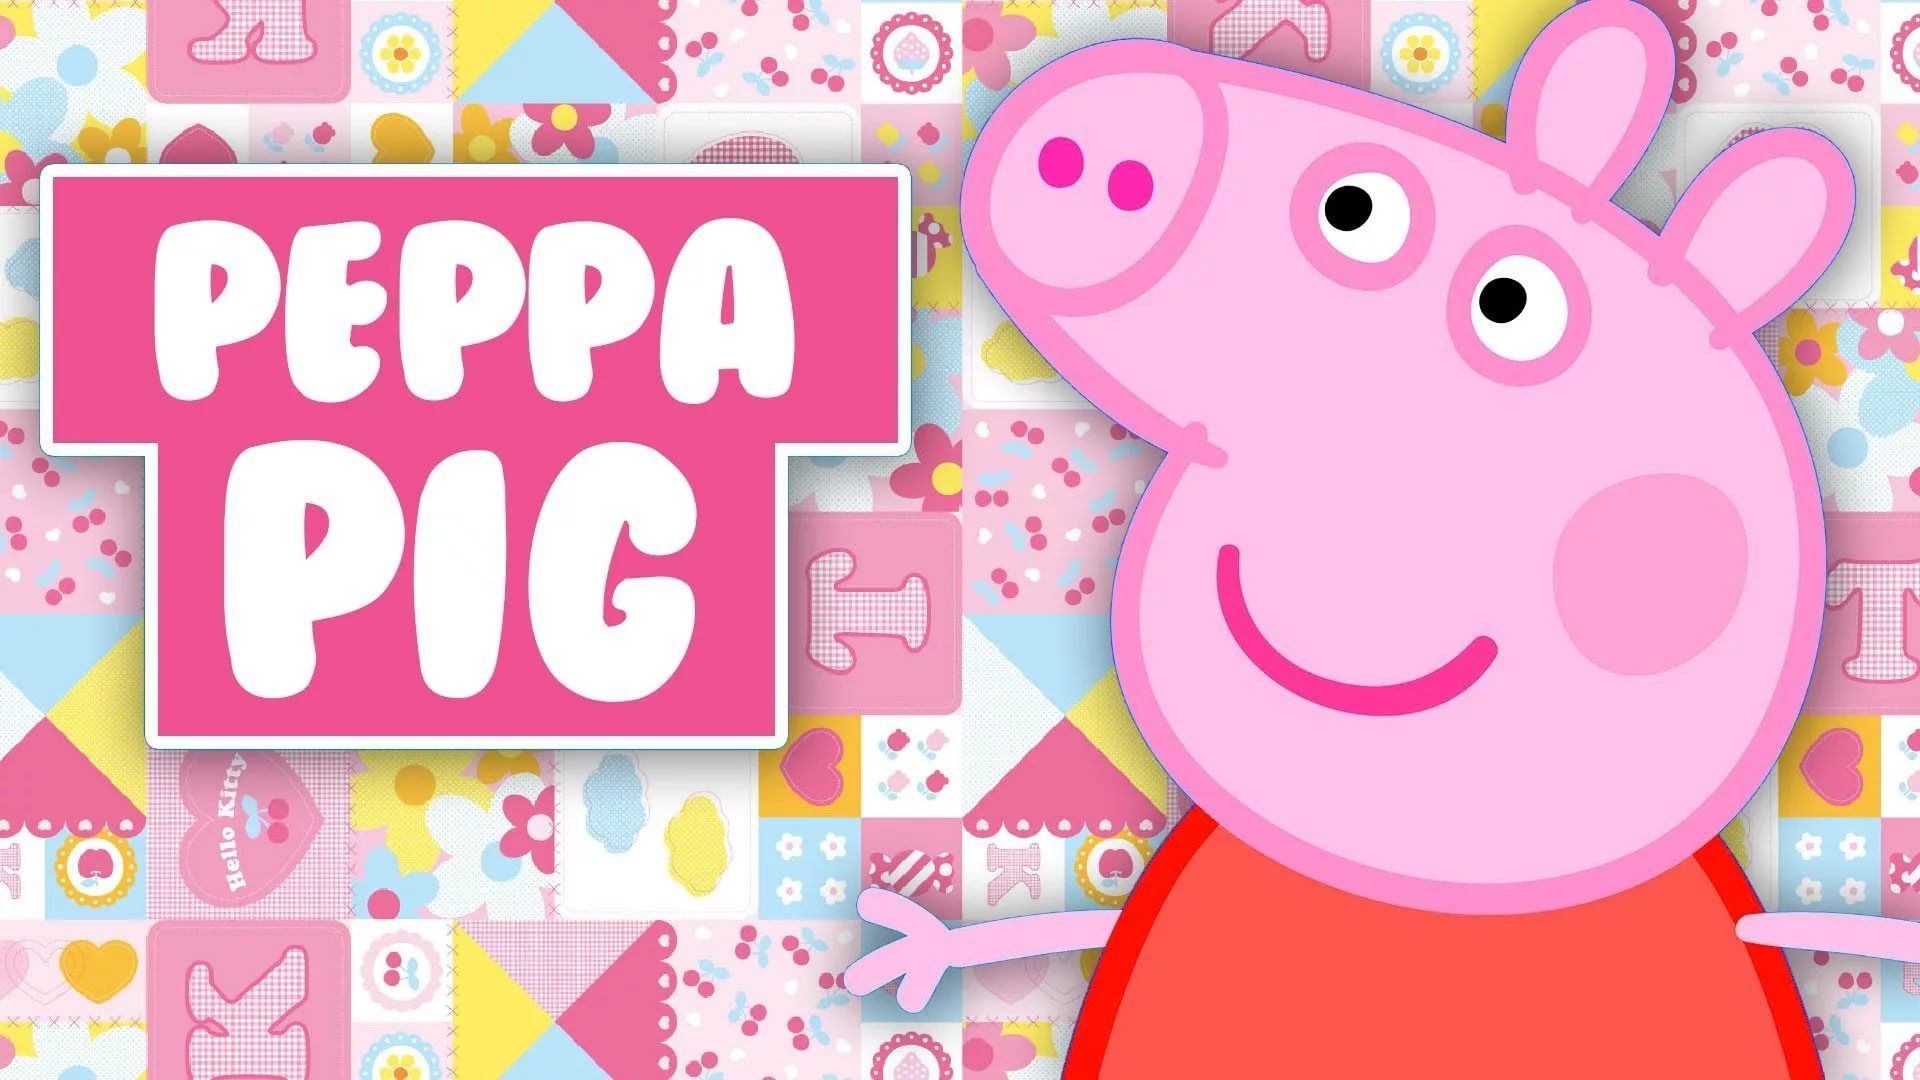 Peppa Pig is a British children's television show created by Mark W.人员 - Peppa Pig